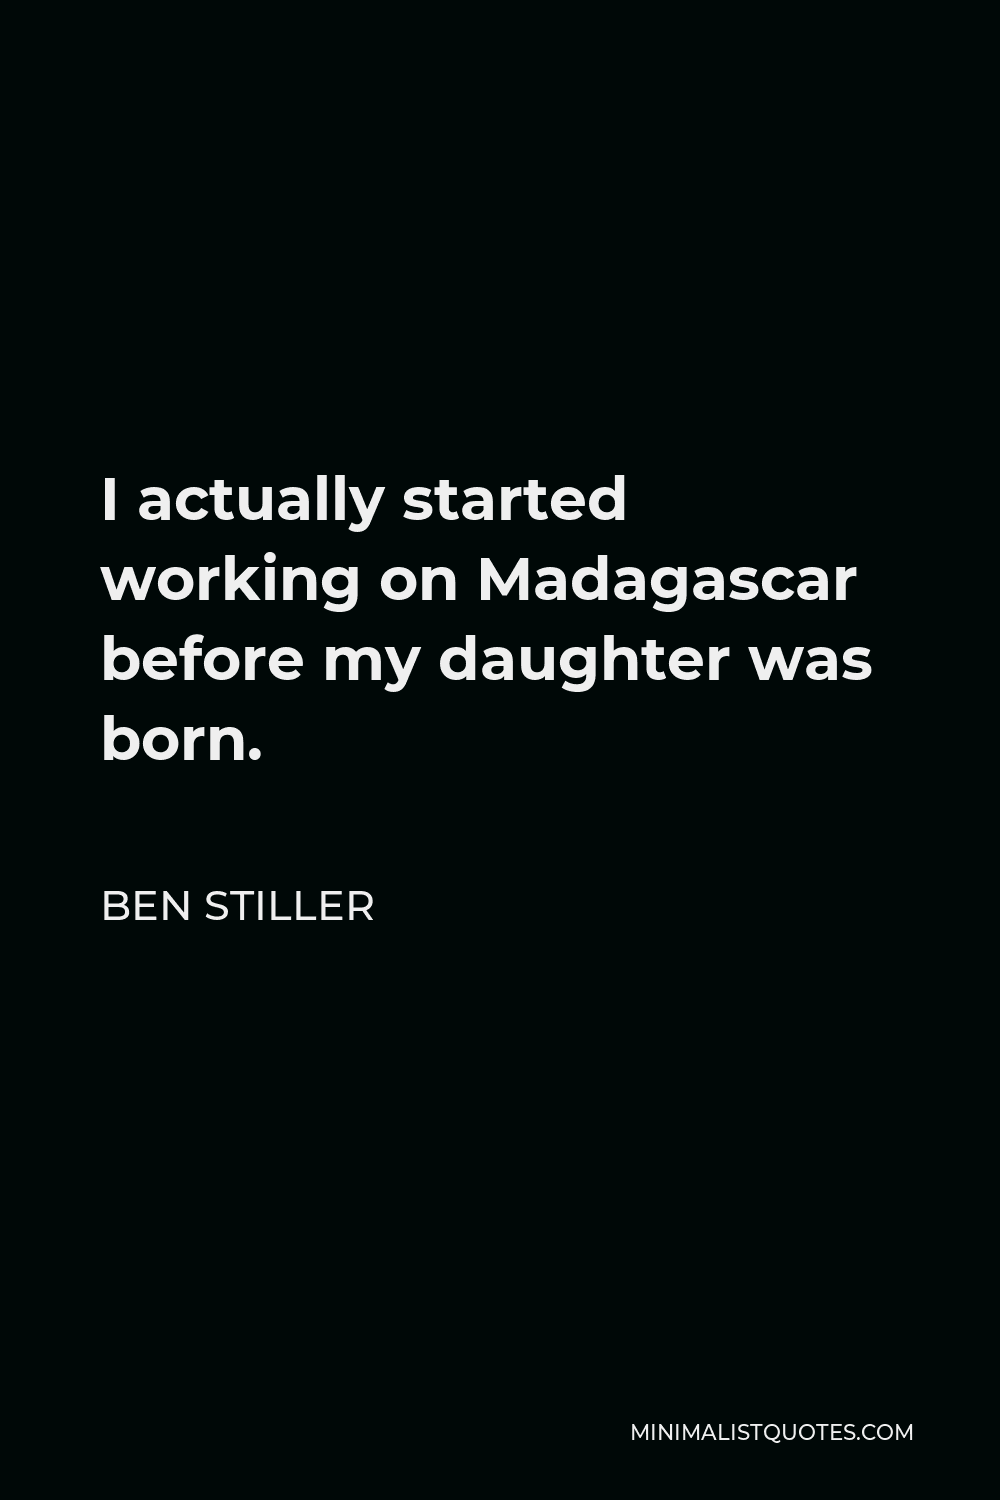 Ben Stiller Quote - I actually started working on Madagascar before my daughter was born.